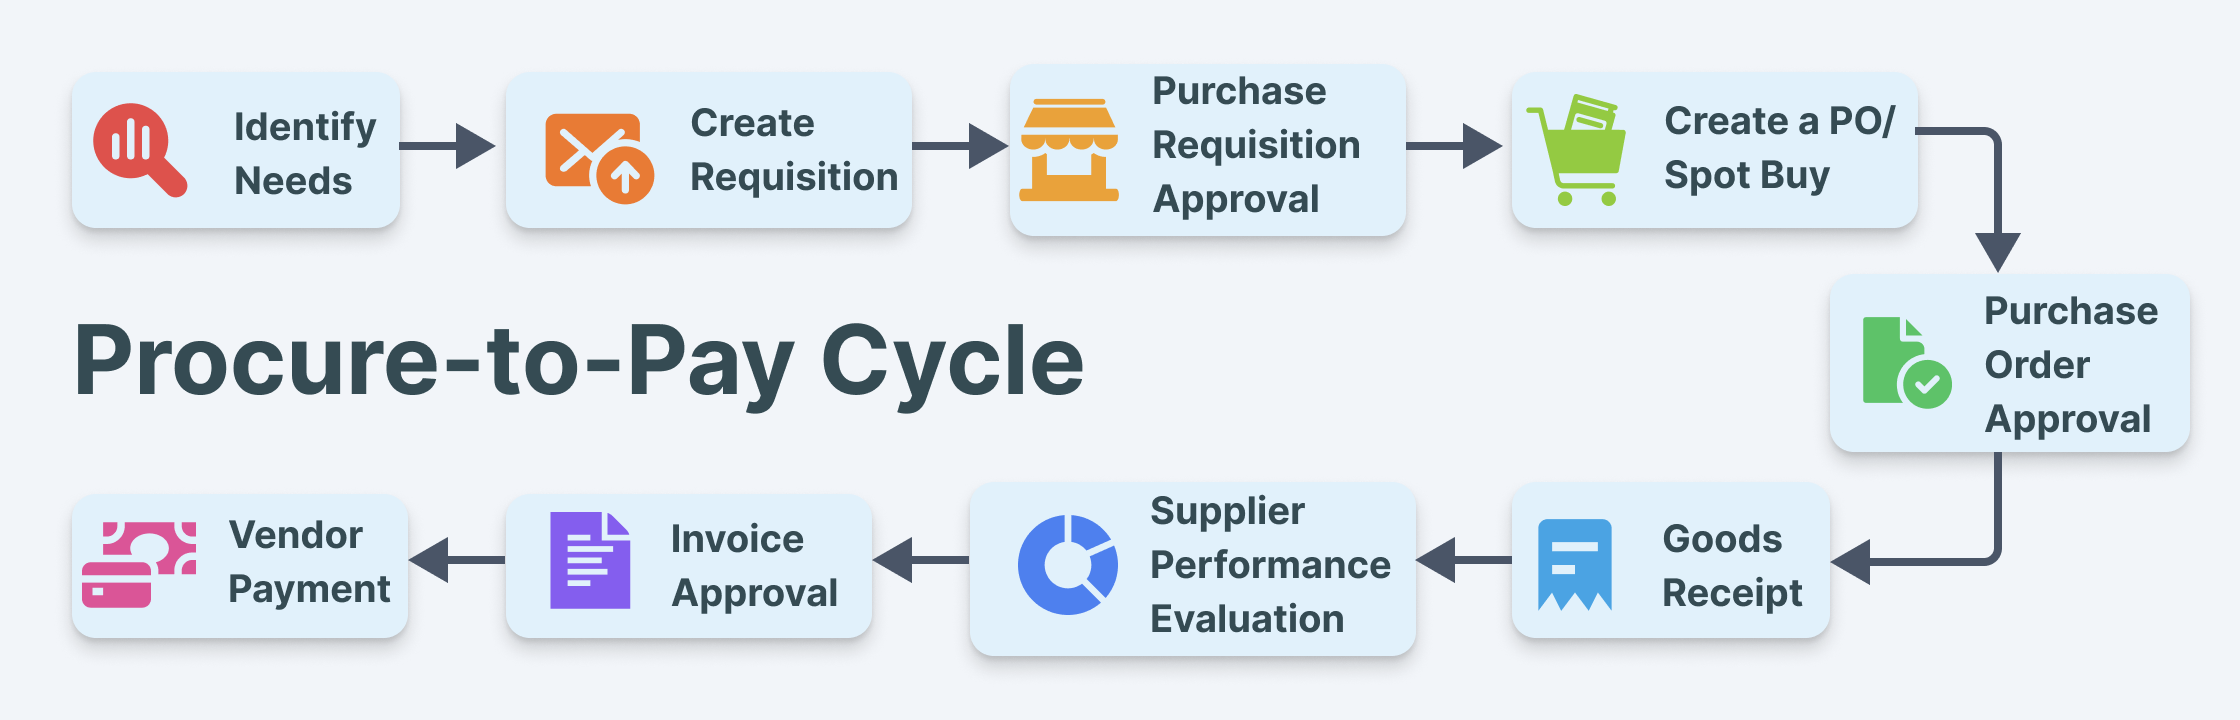 Procure-to-pay cycle